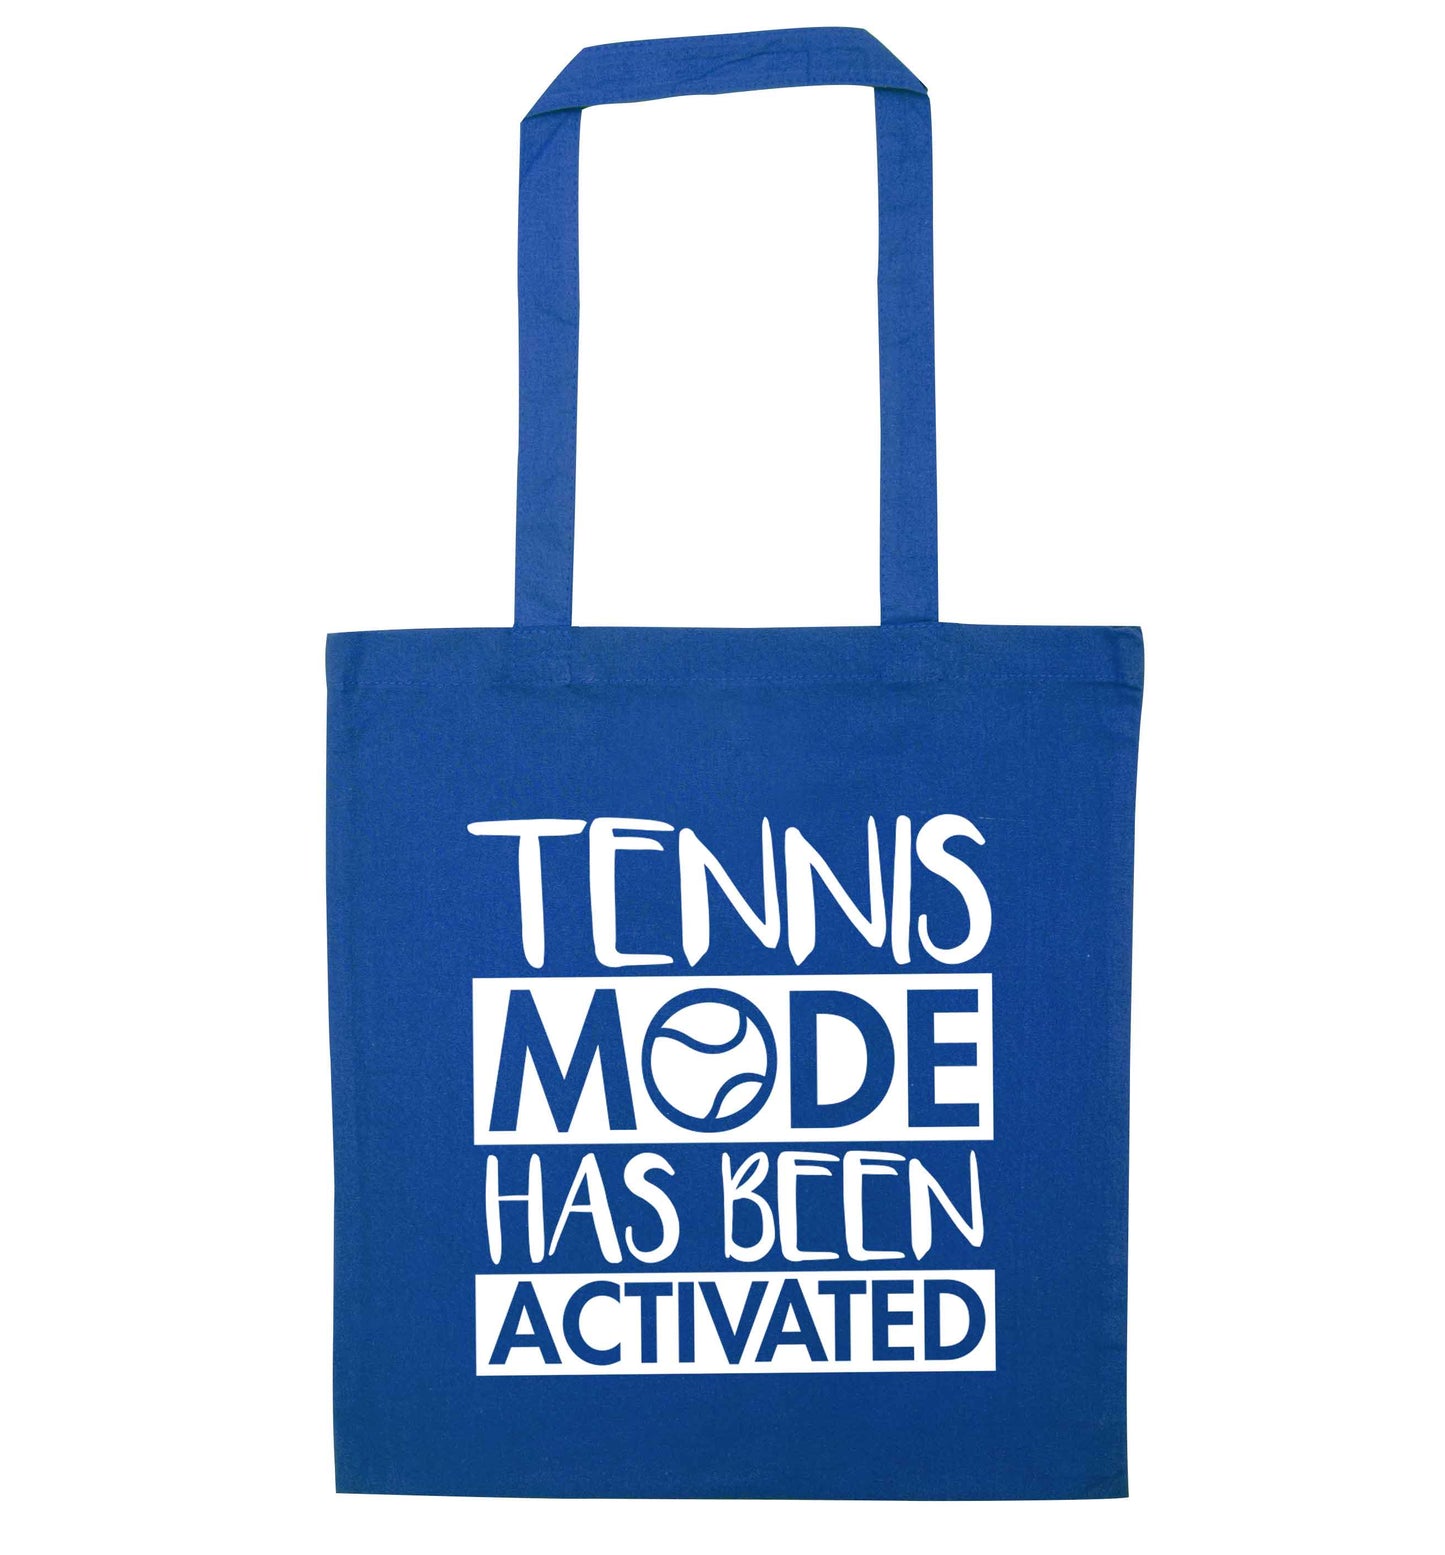 Tennis mode has been activated blue tote bag